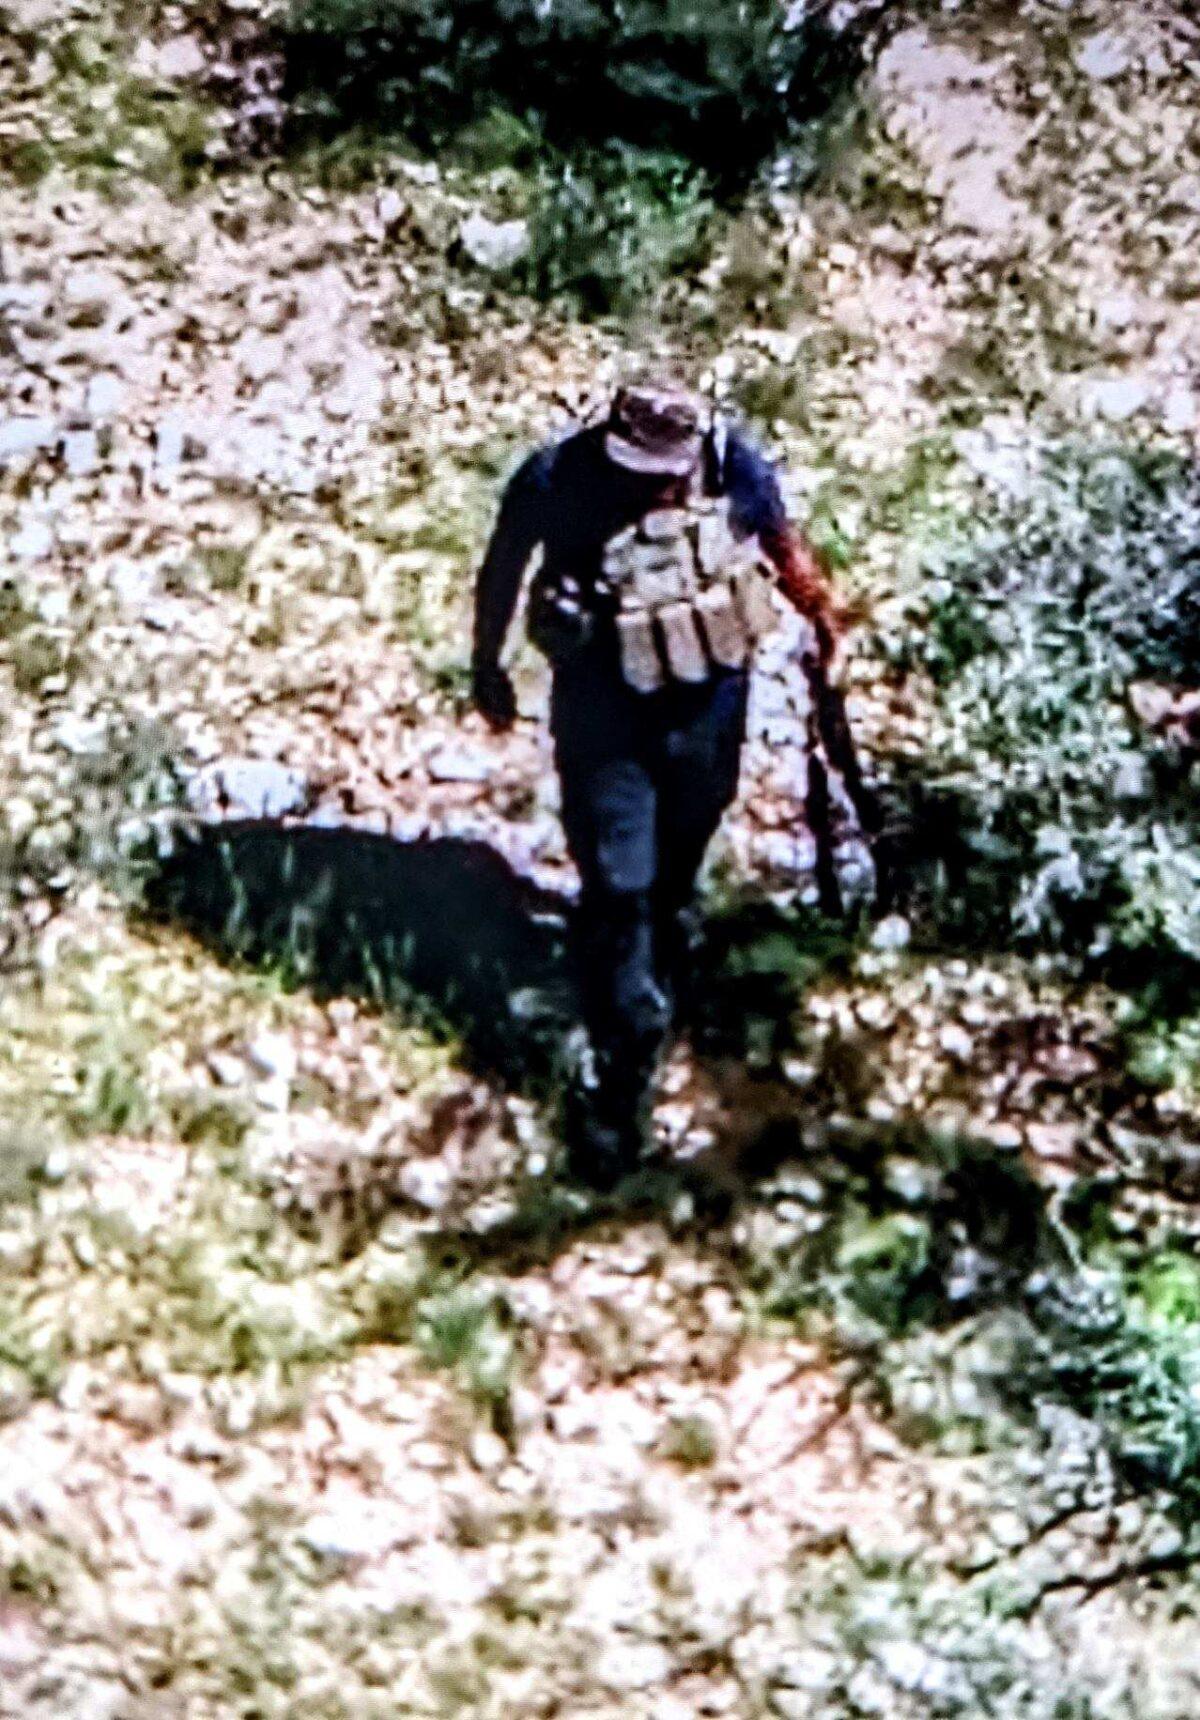 Closeup drone footage shows a heavily armed Mexican drug cartel member walking near Arizona's border with Mexico on Aug. 25. Seconds later, the man took aim at the drone with his rifle hoping to shoot it down. (Photos courtesy Arizona private security company)